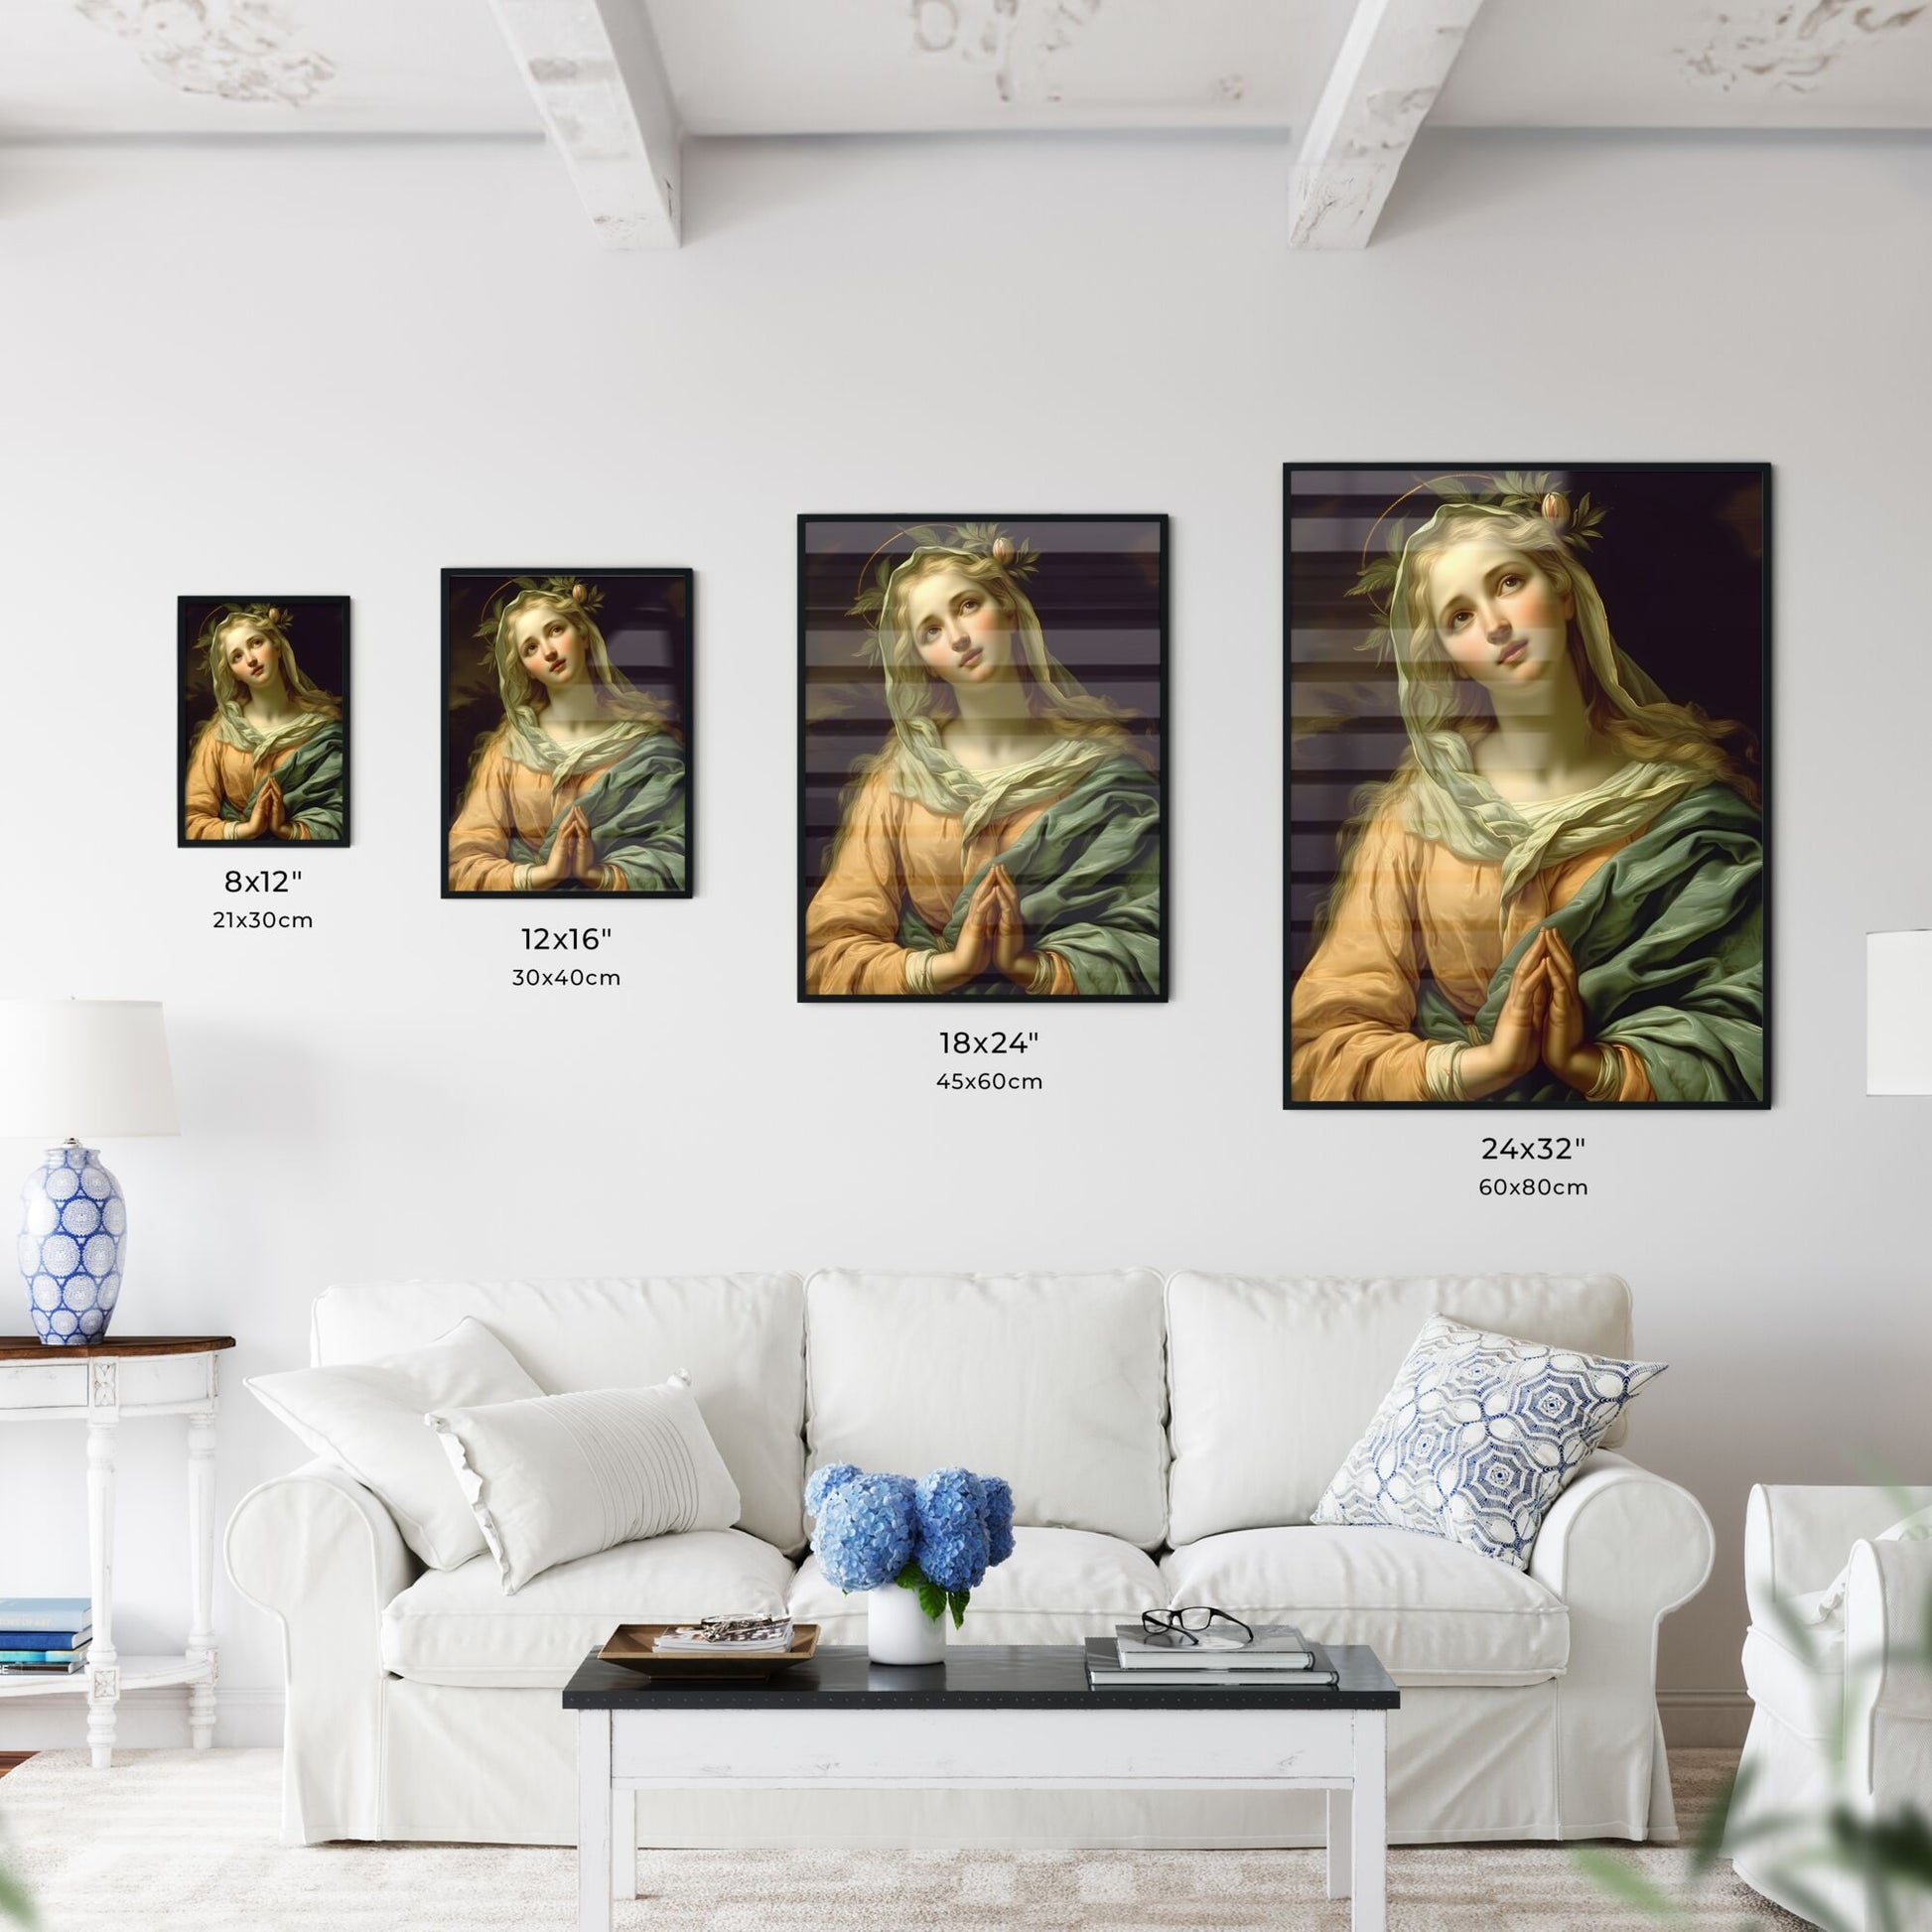 Mary Mother mystical rose, immaculate heart, beautiful loving expression - Art print of a group of people walking down a snowy street Default Title